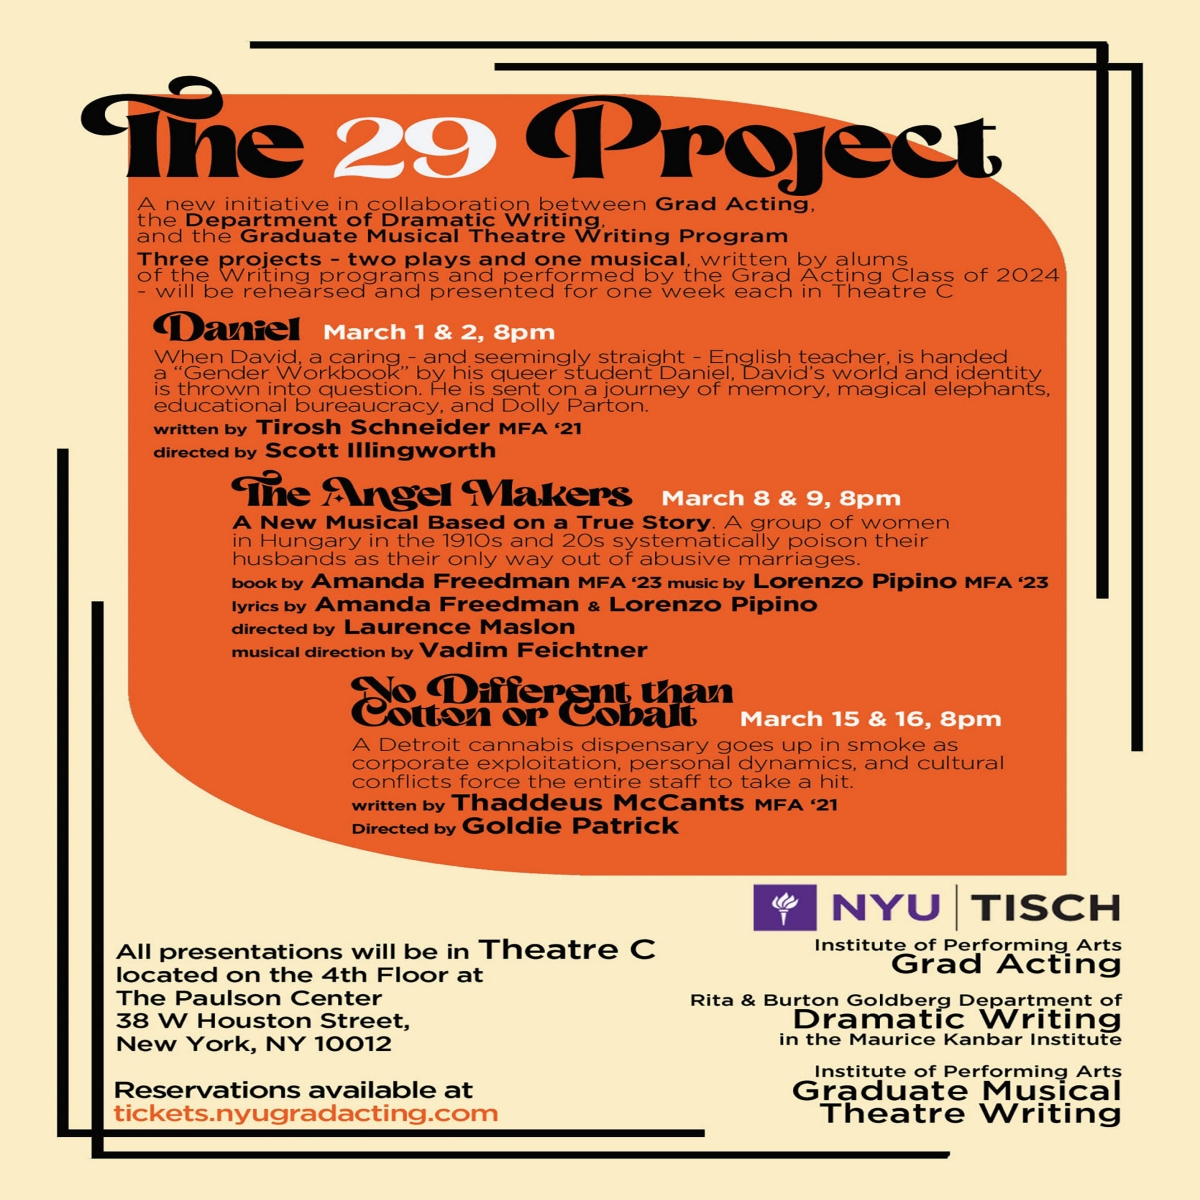 The 29 Project